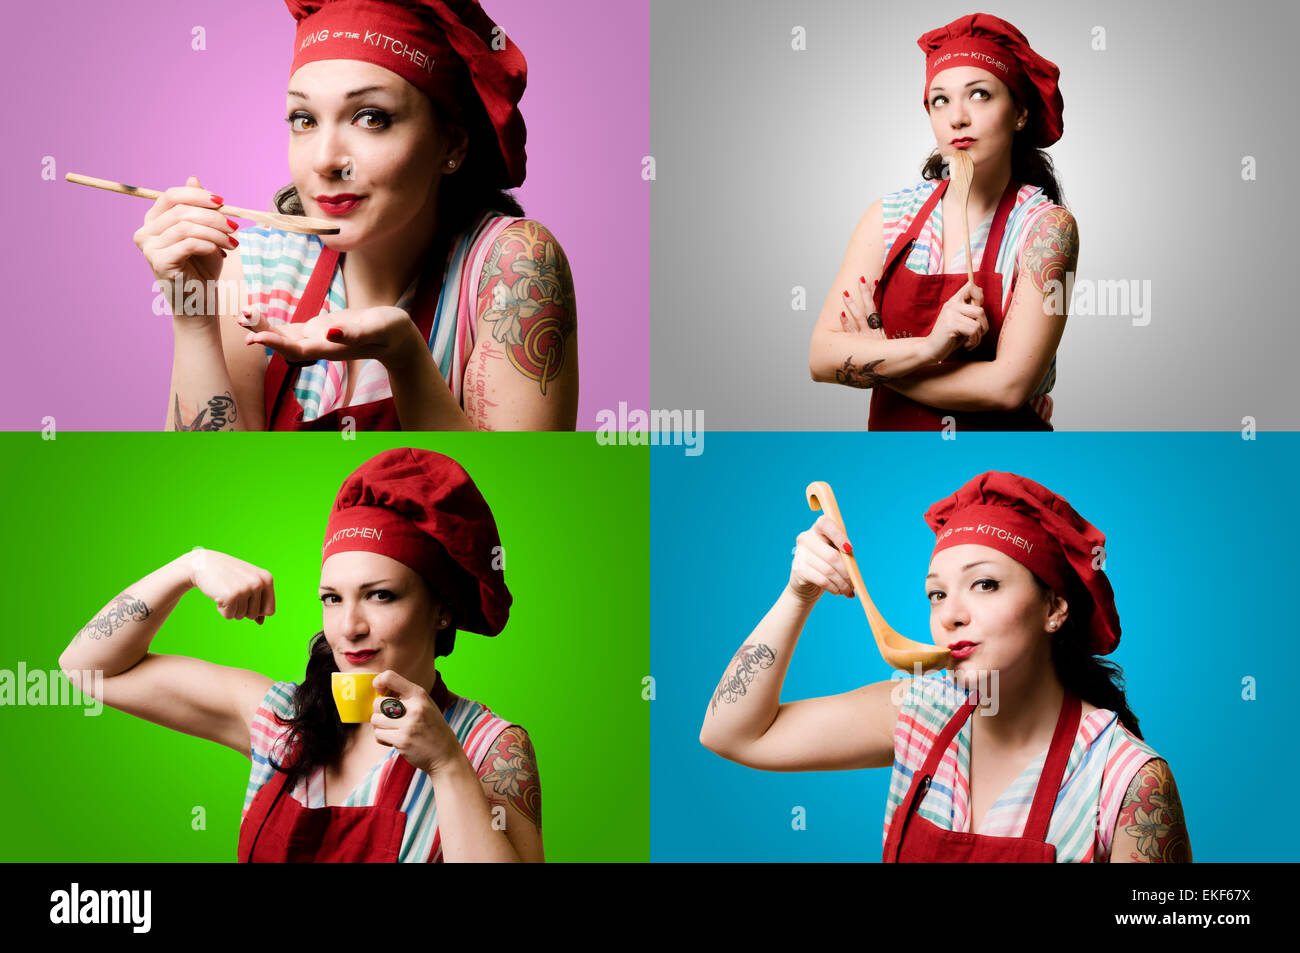 set of pinup cook girl Stock Photo